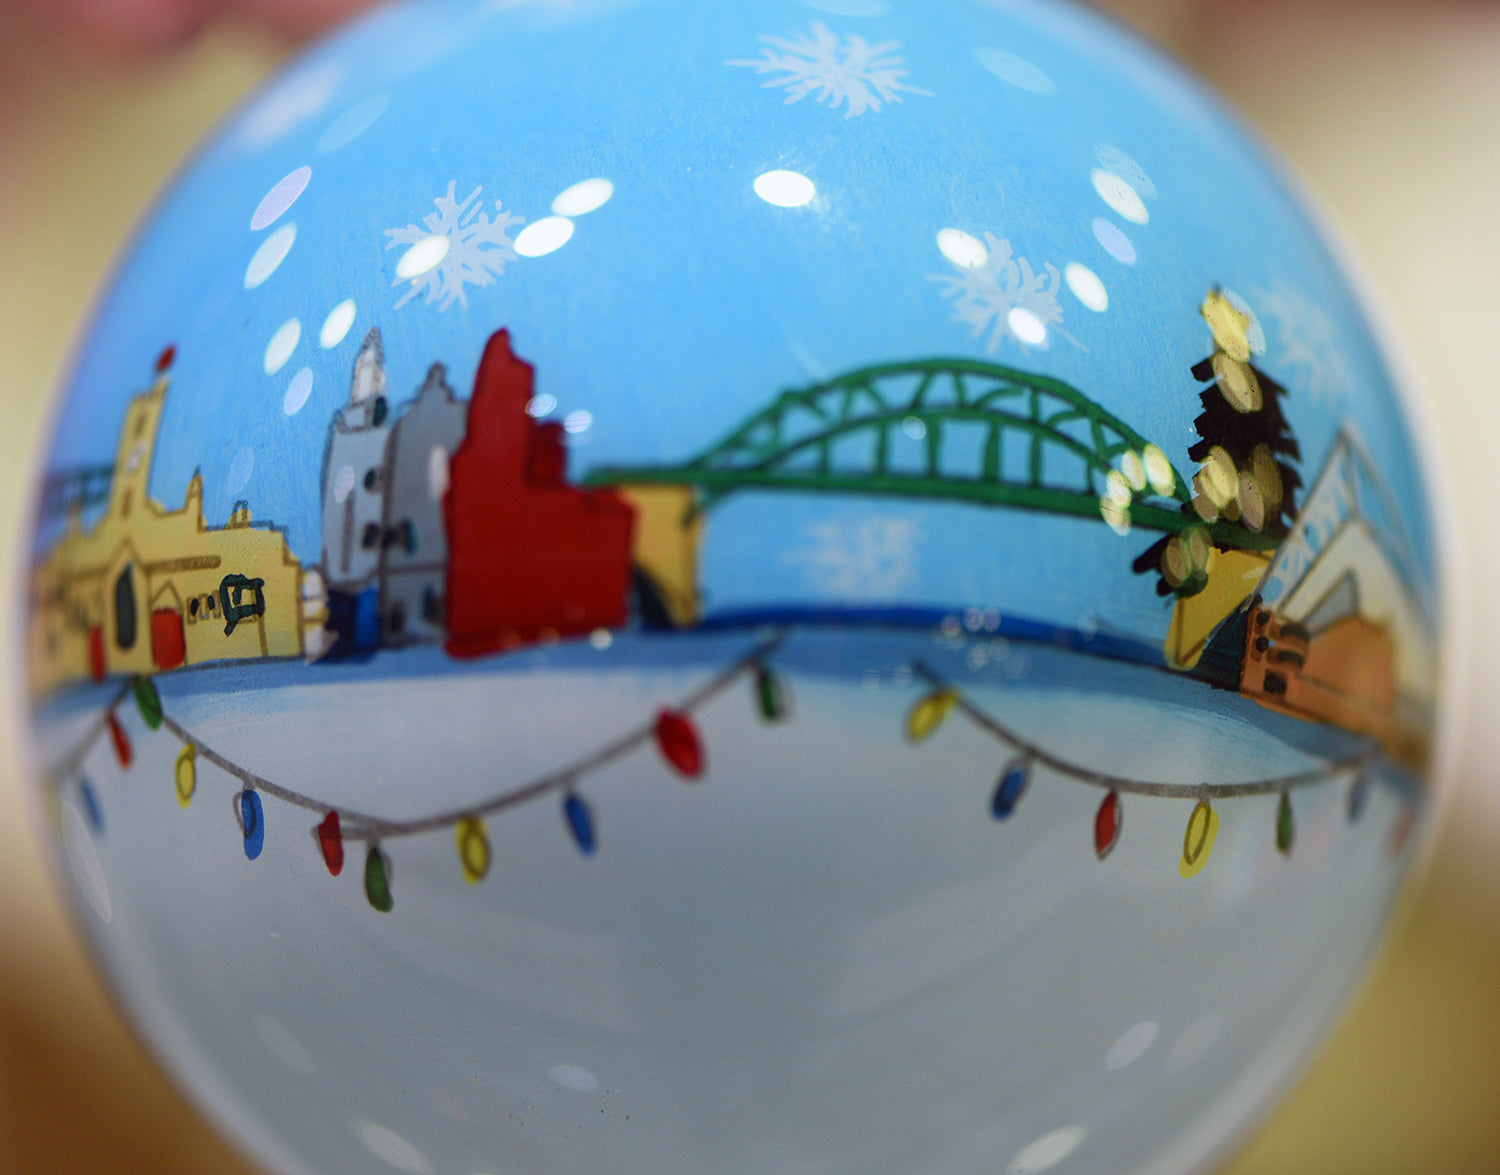 A close up photograph of a white and blue bauble with small painted Sunderland buildings and landmarks in a line across the middle with colourful string lights underneath and pale snowflakes above. From left to right: The Empire Theatre, Wearmouth Bridge, a large Christmas tree with a yellow star on top and the Stadium of Light.